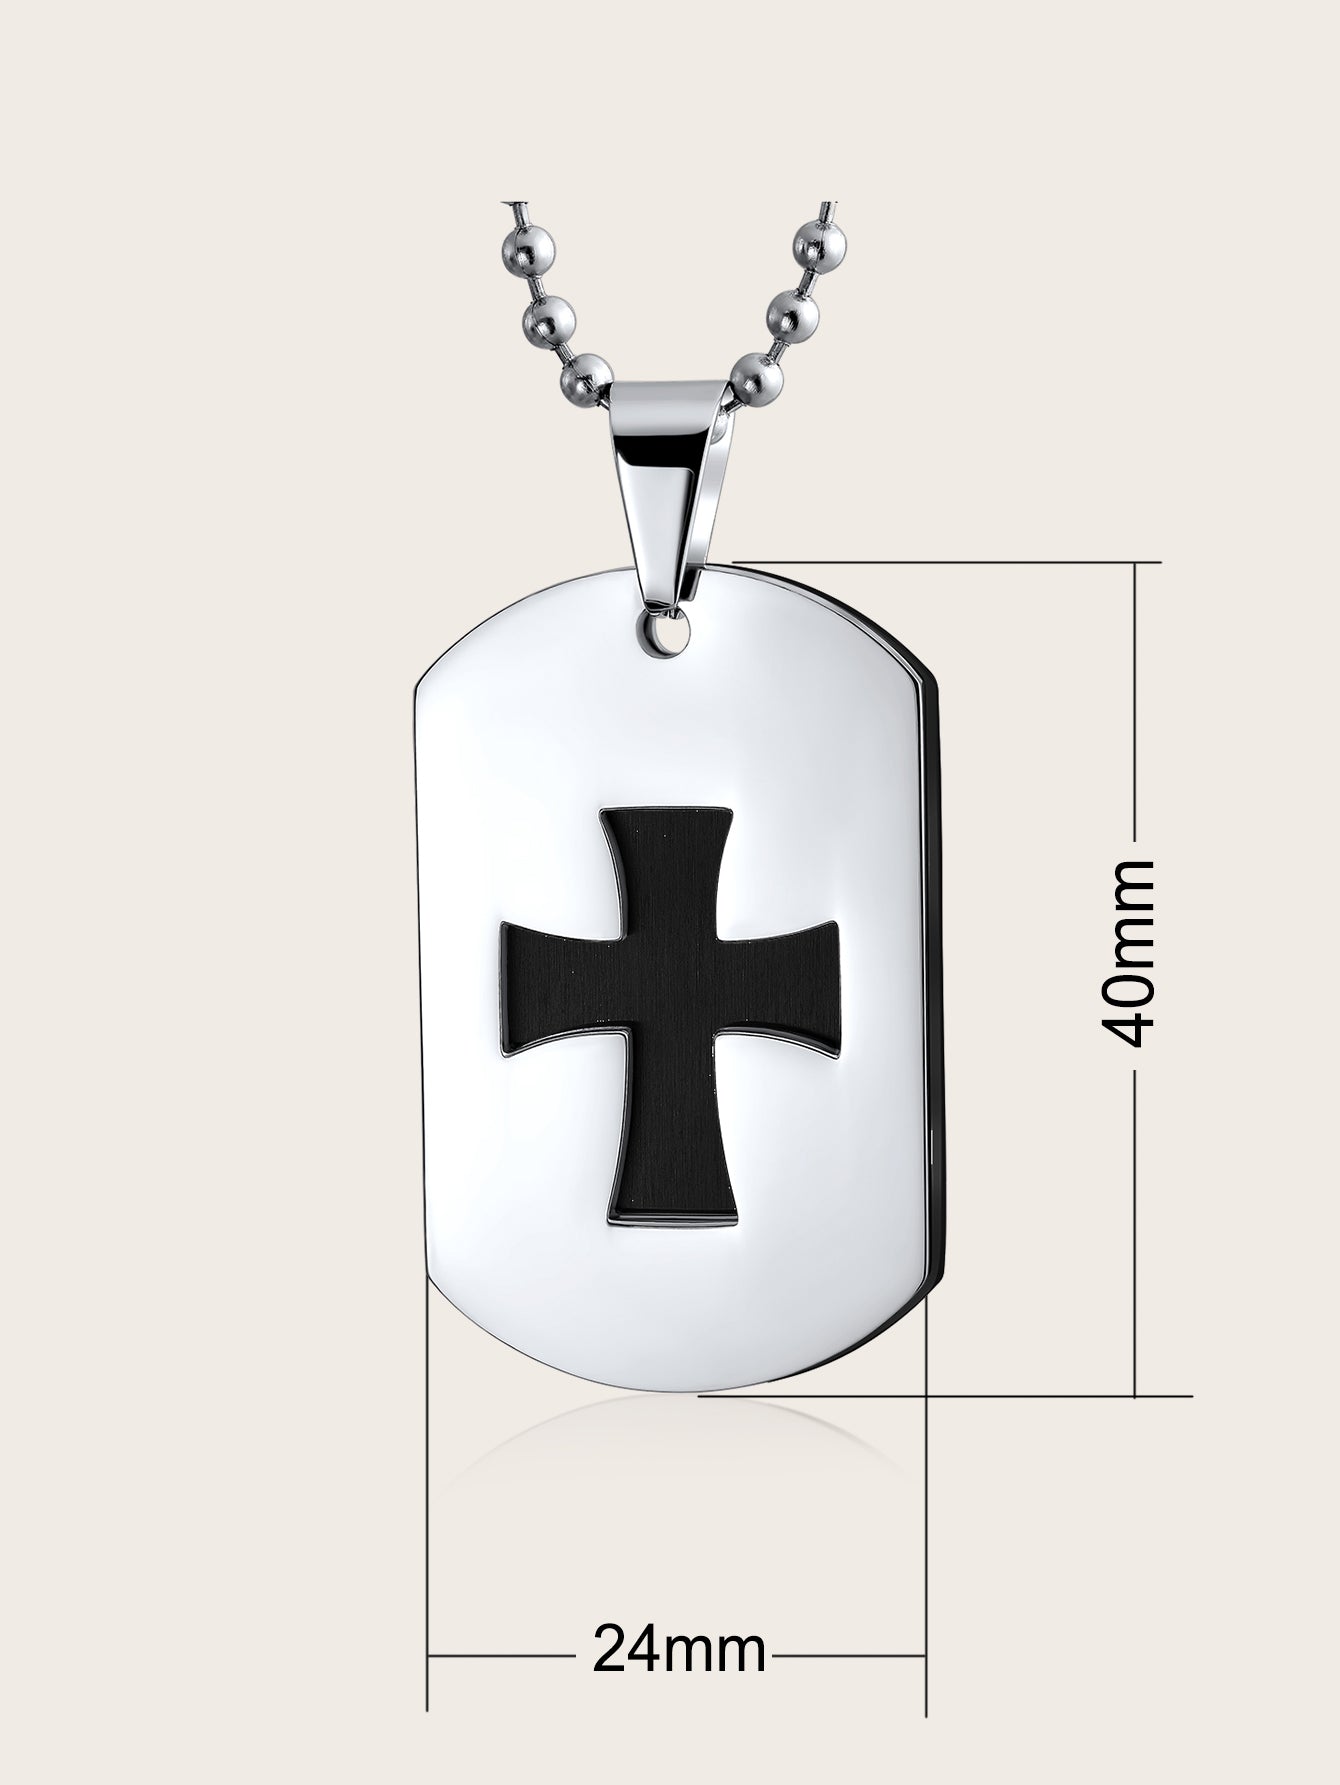 Bible Verse Cross Dog Tag Necklace for Men Stainless Steel Chain 24inch Inspirational Christian Jewelry Meaningful Religious Gift for Boys